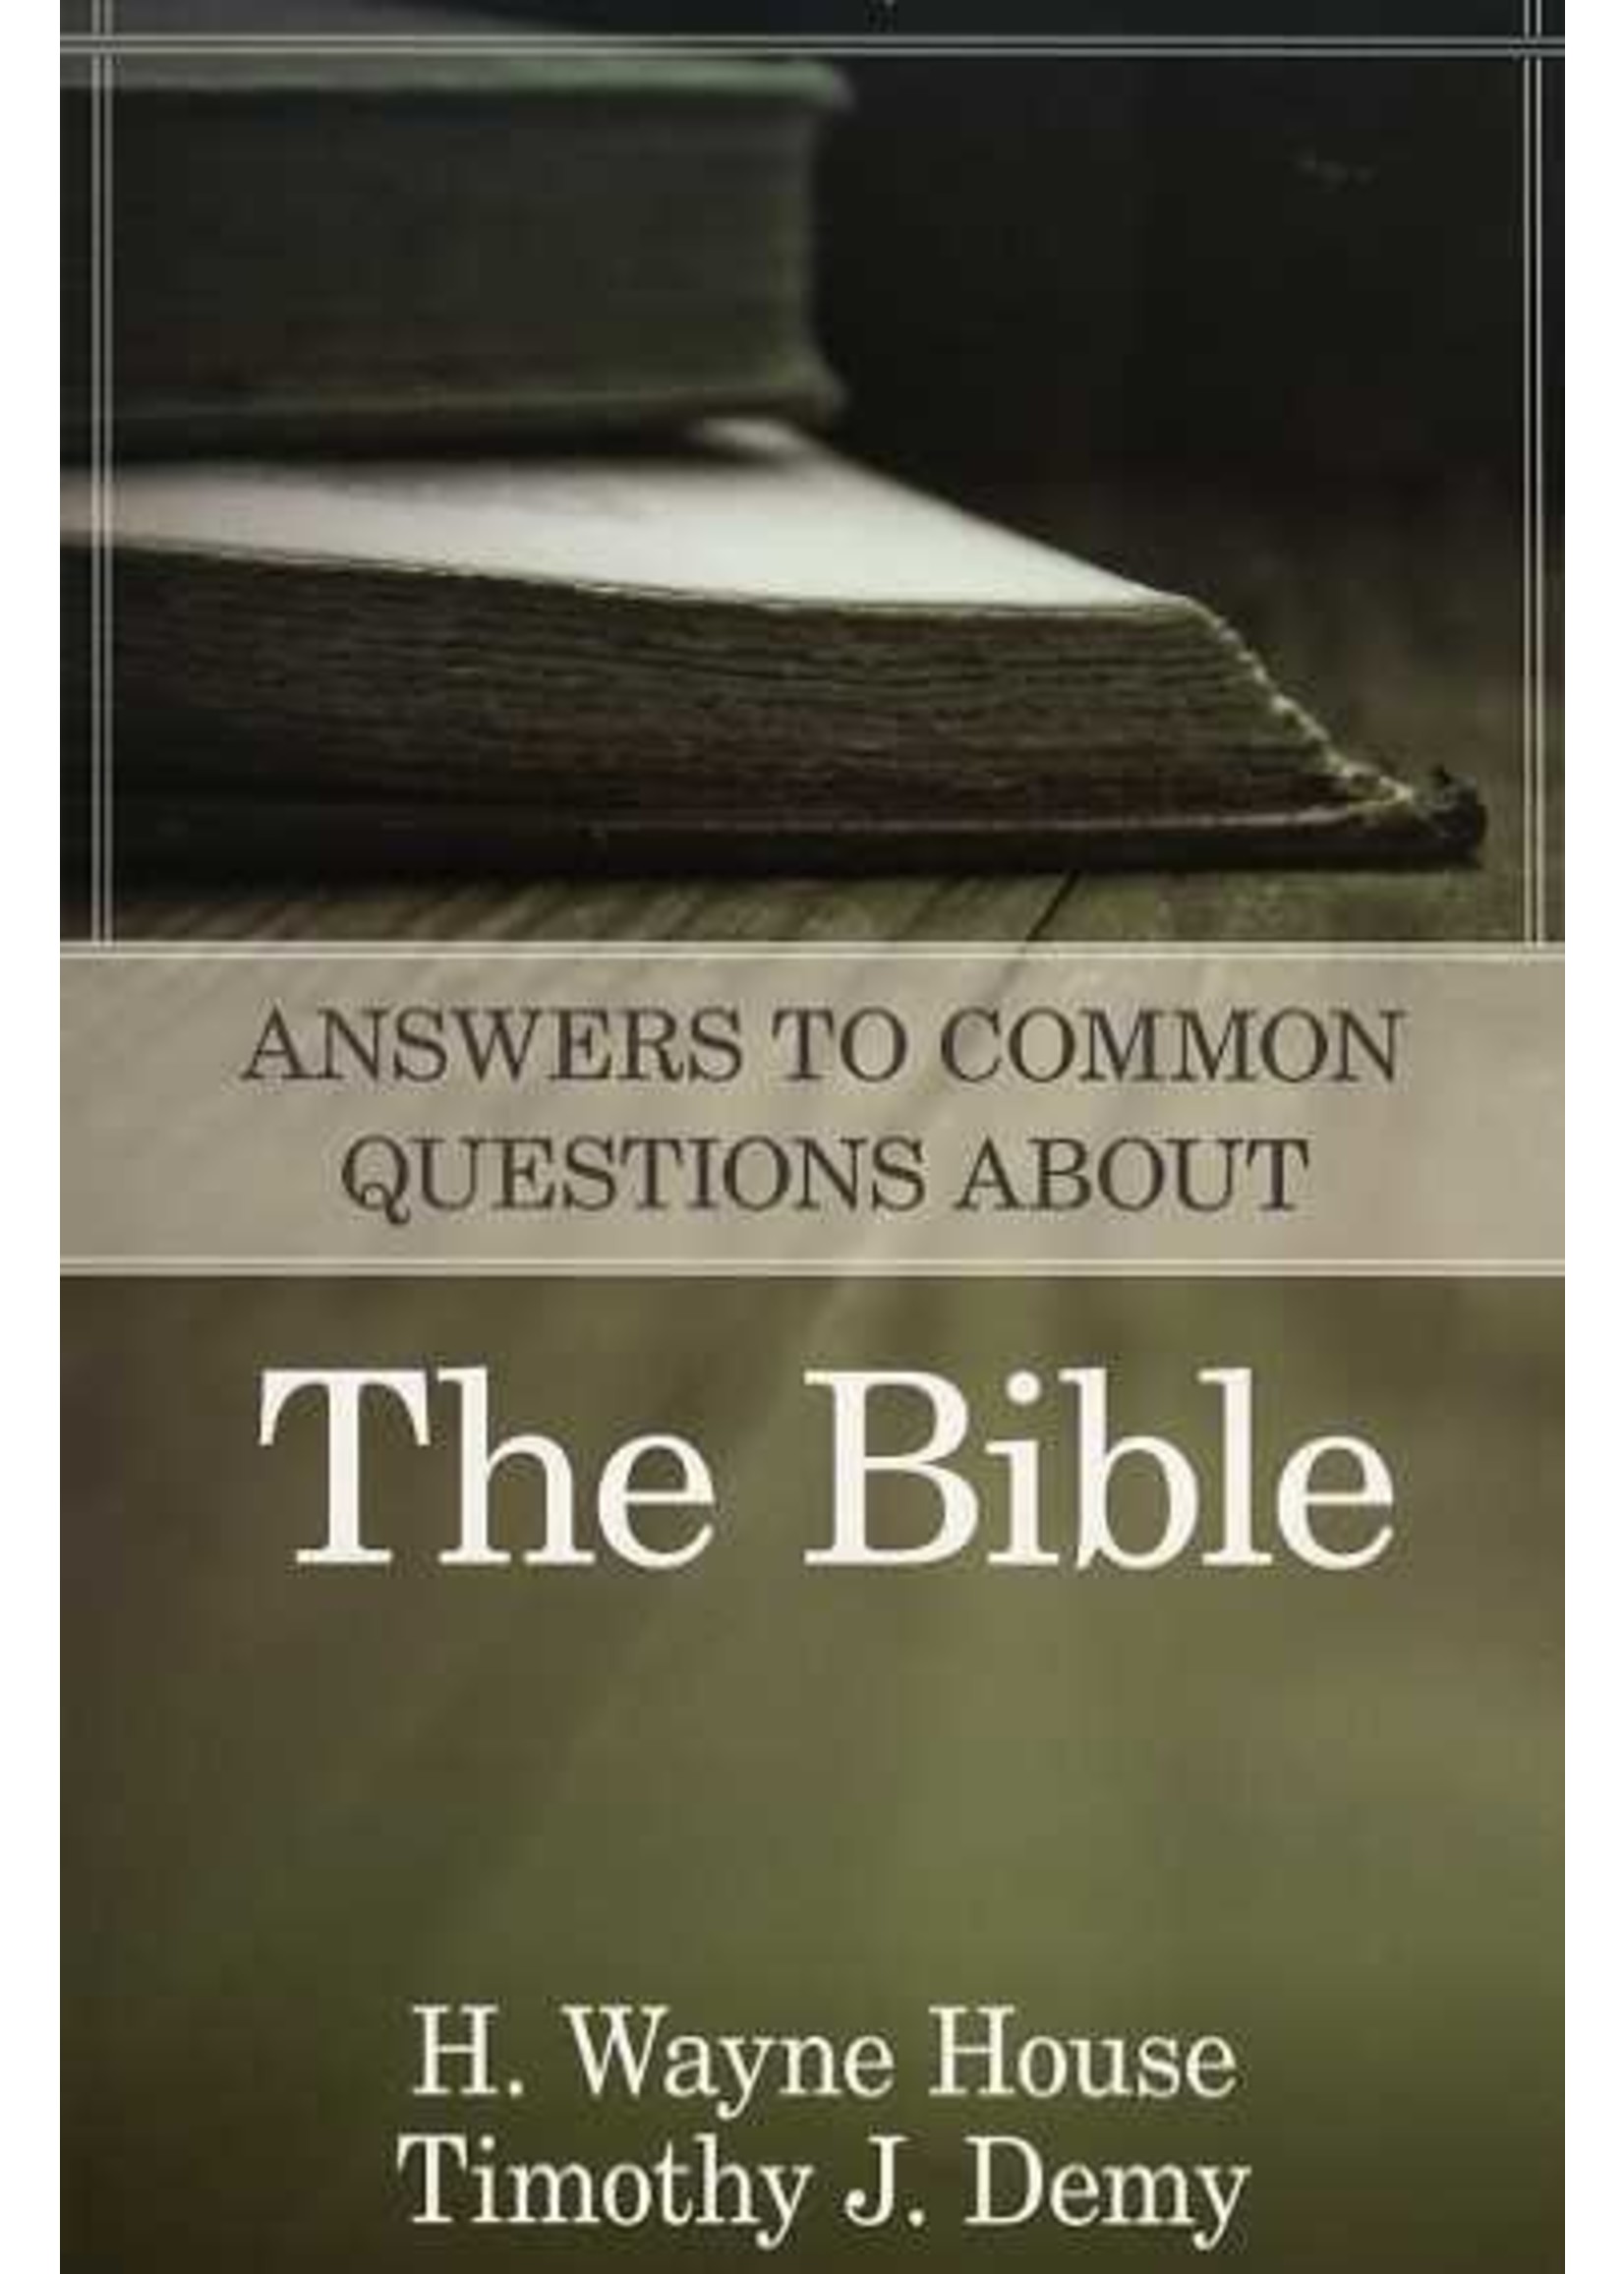 Kregel Publications Answers to Common Questions About the Bible - Wayne House and Timothy Demy